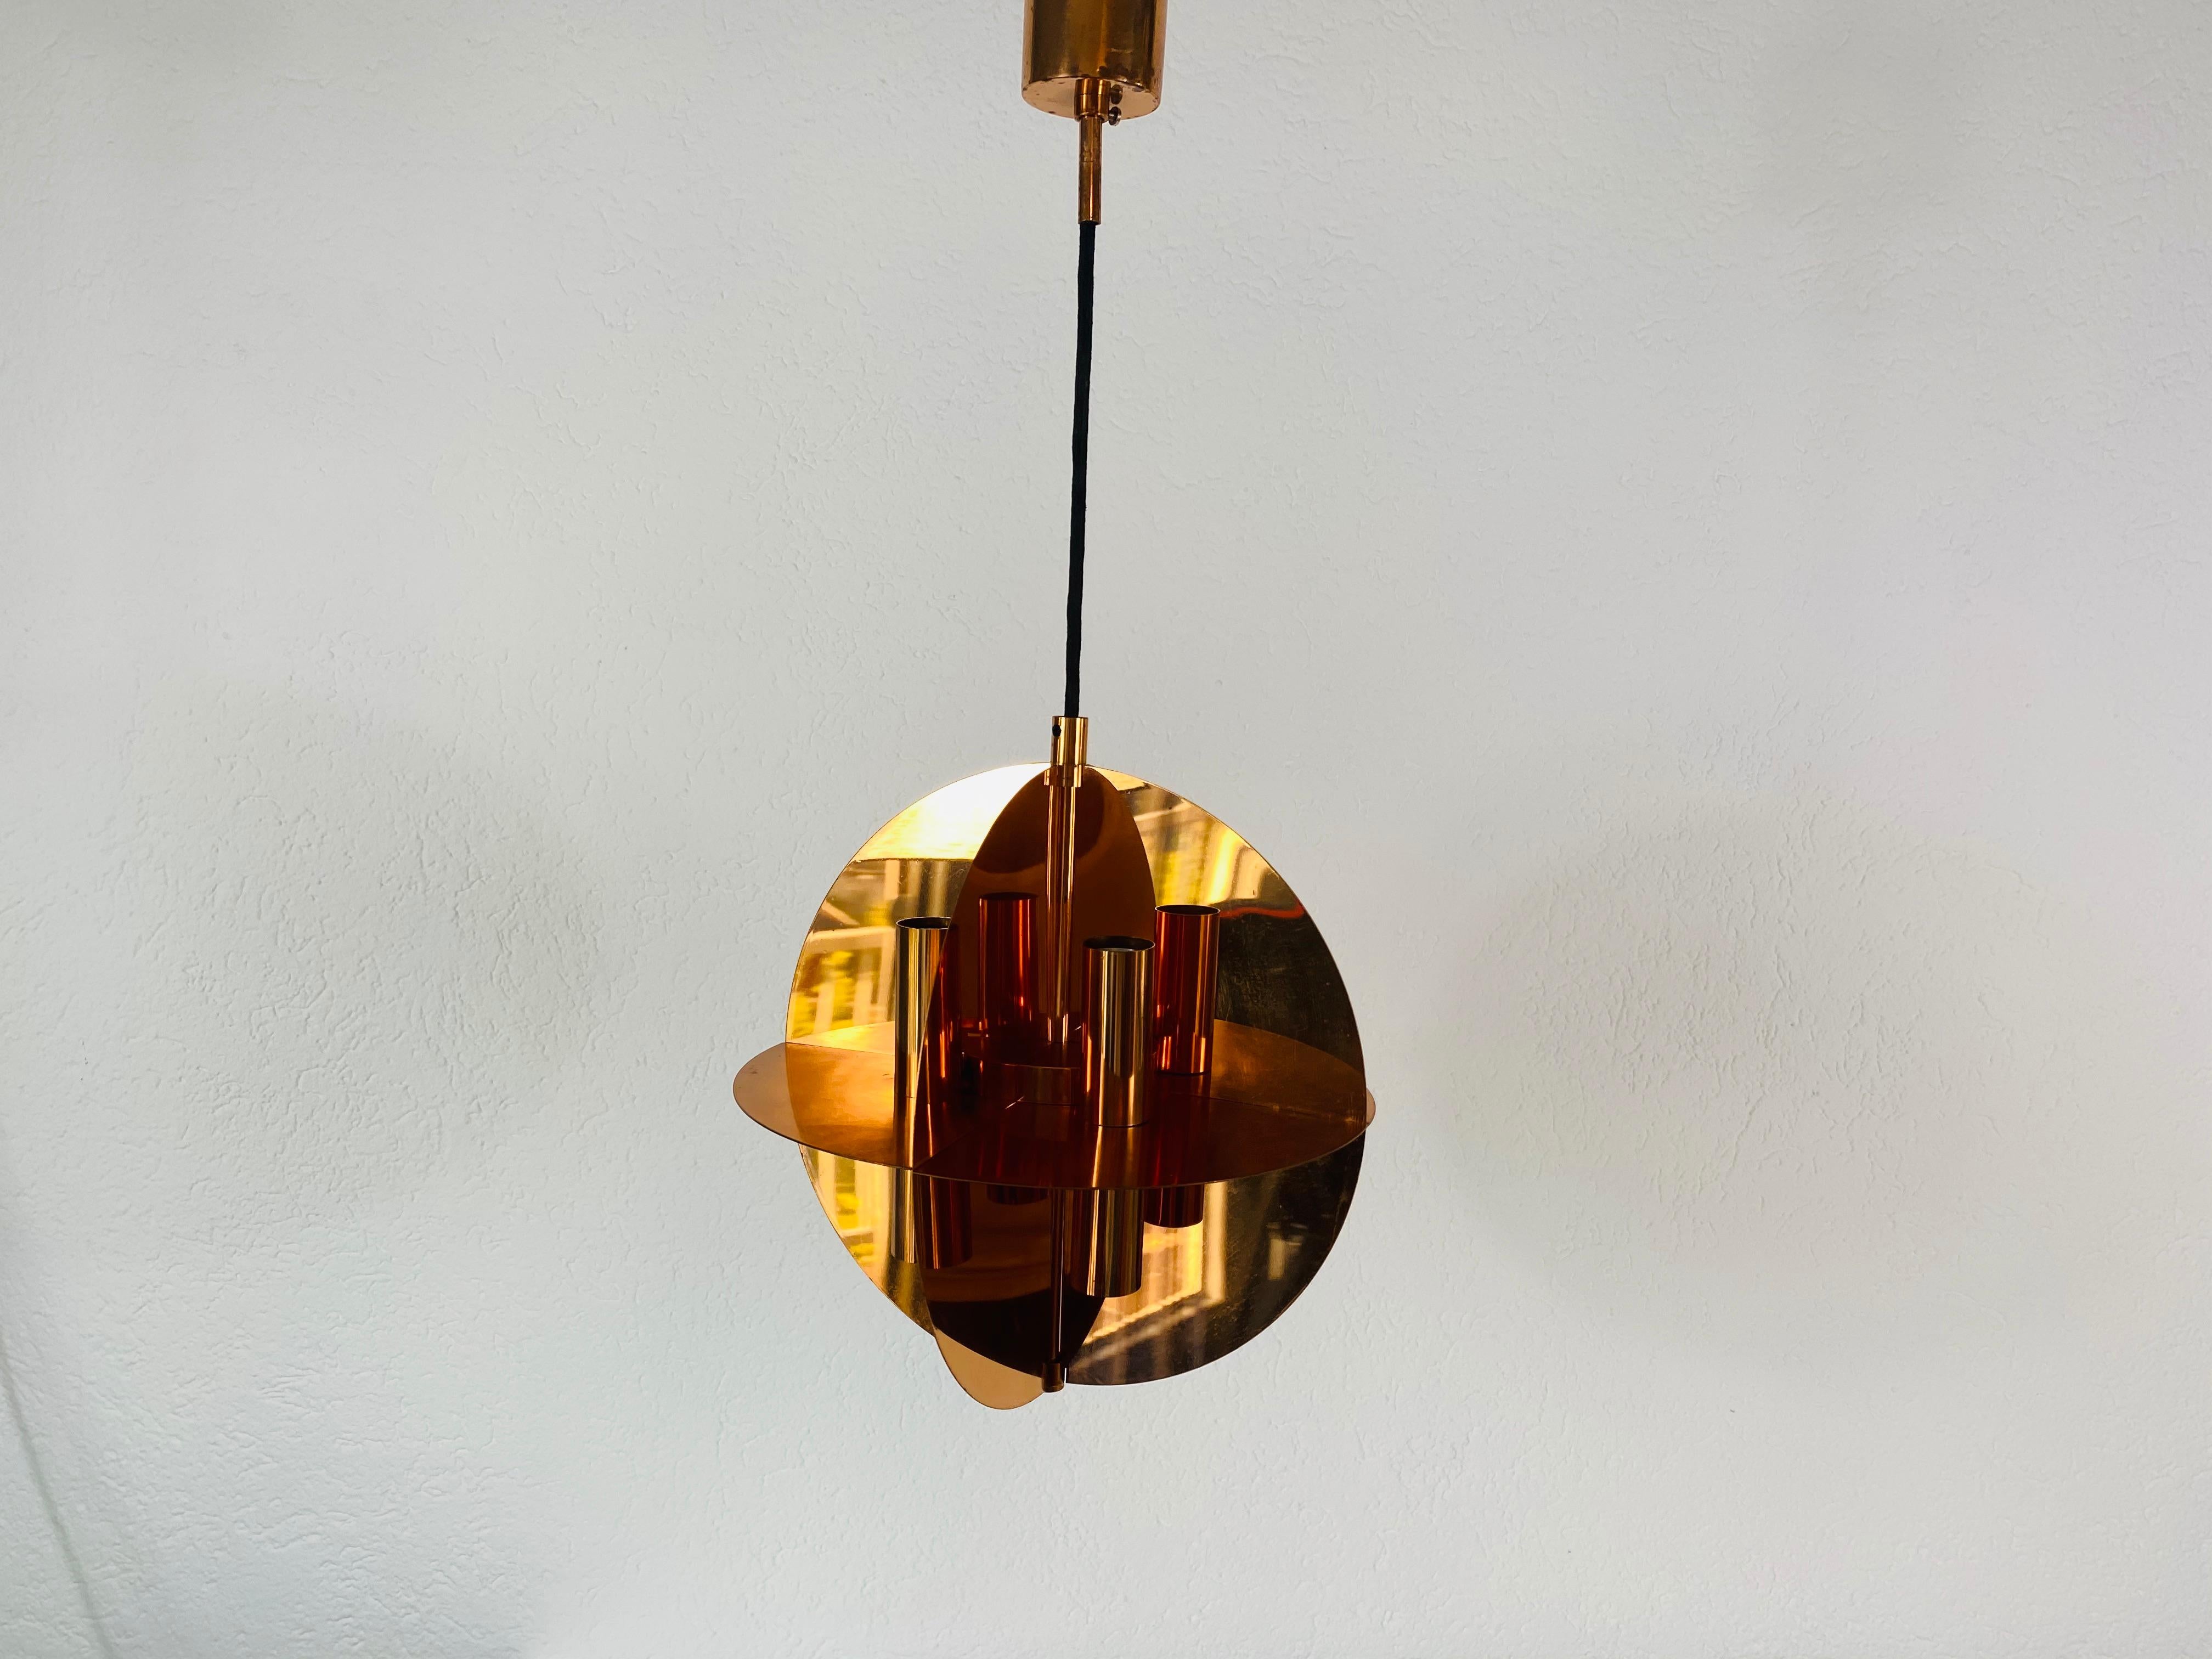 Extraordinary copper pendant lamp by Cosack in the 1970s.

Measures: Height of shade 34 cm

Max height 65 cm

Diameter 27 cm 


The light requires eight E14 light bulbs. Very good vintage condition.

Free worldwide express shipping.
  